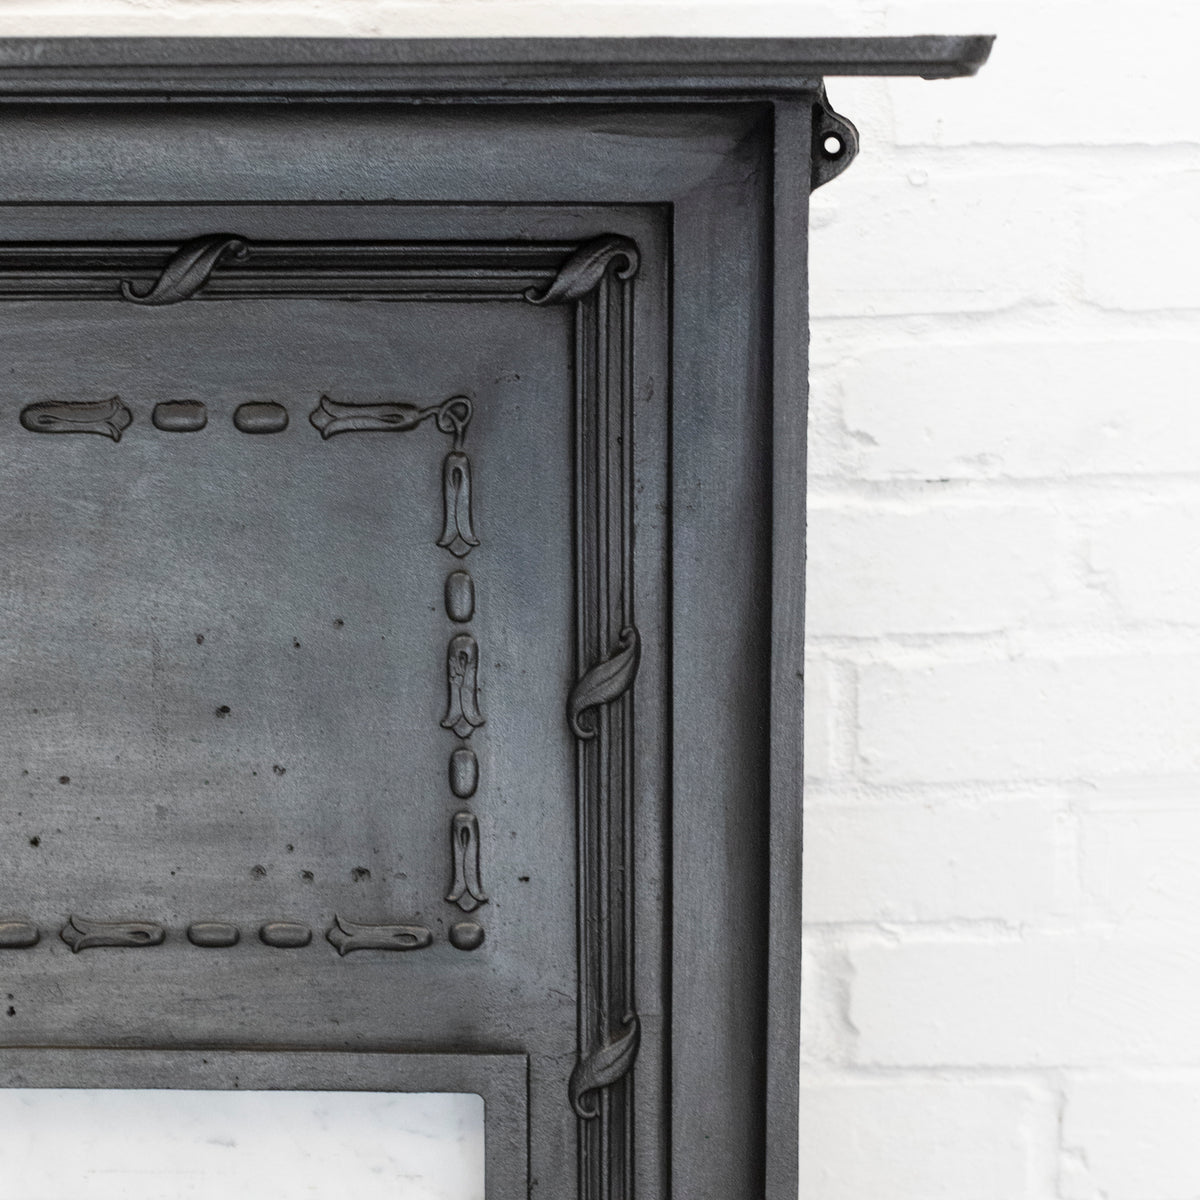 Antique Cast Iron Combination Fireplace With Carrara Marble | The Architectural Forum